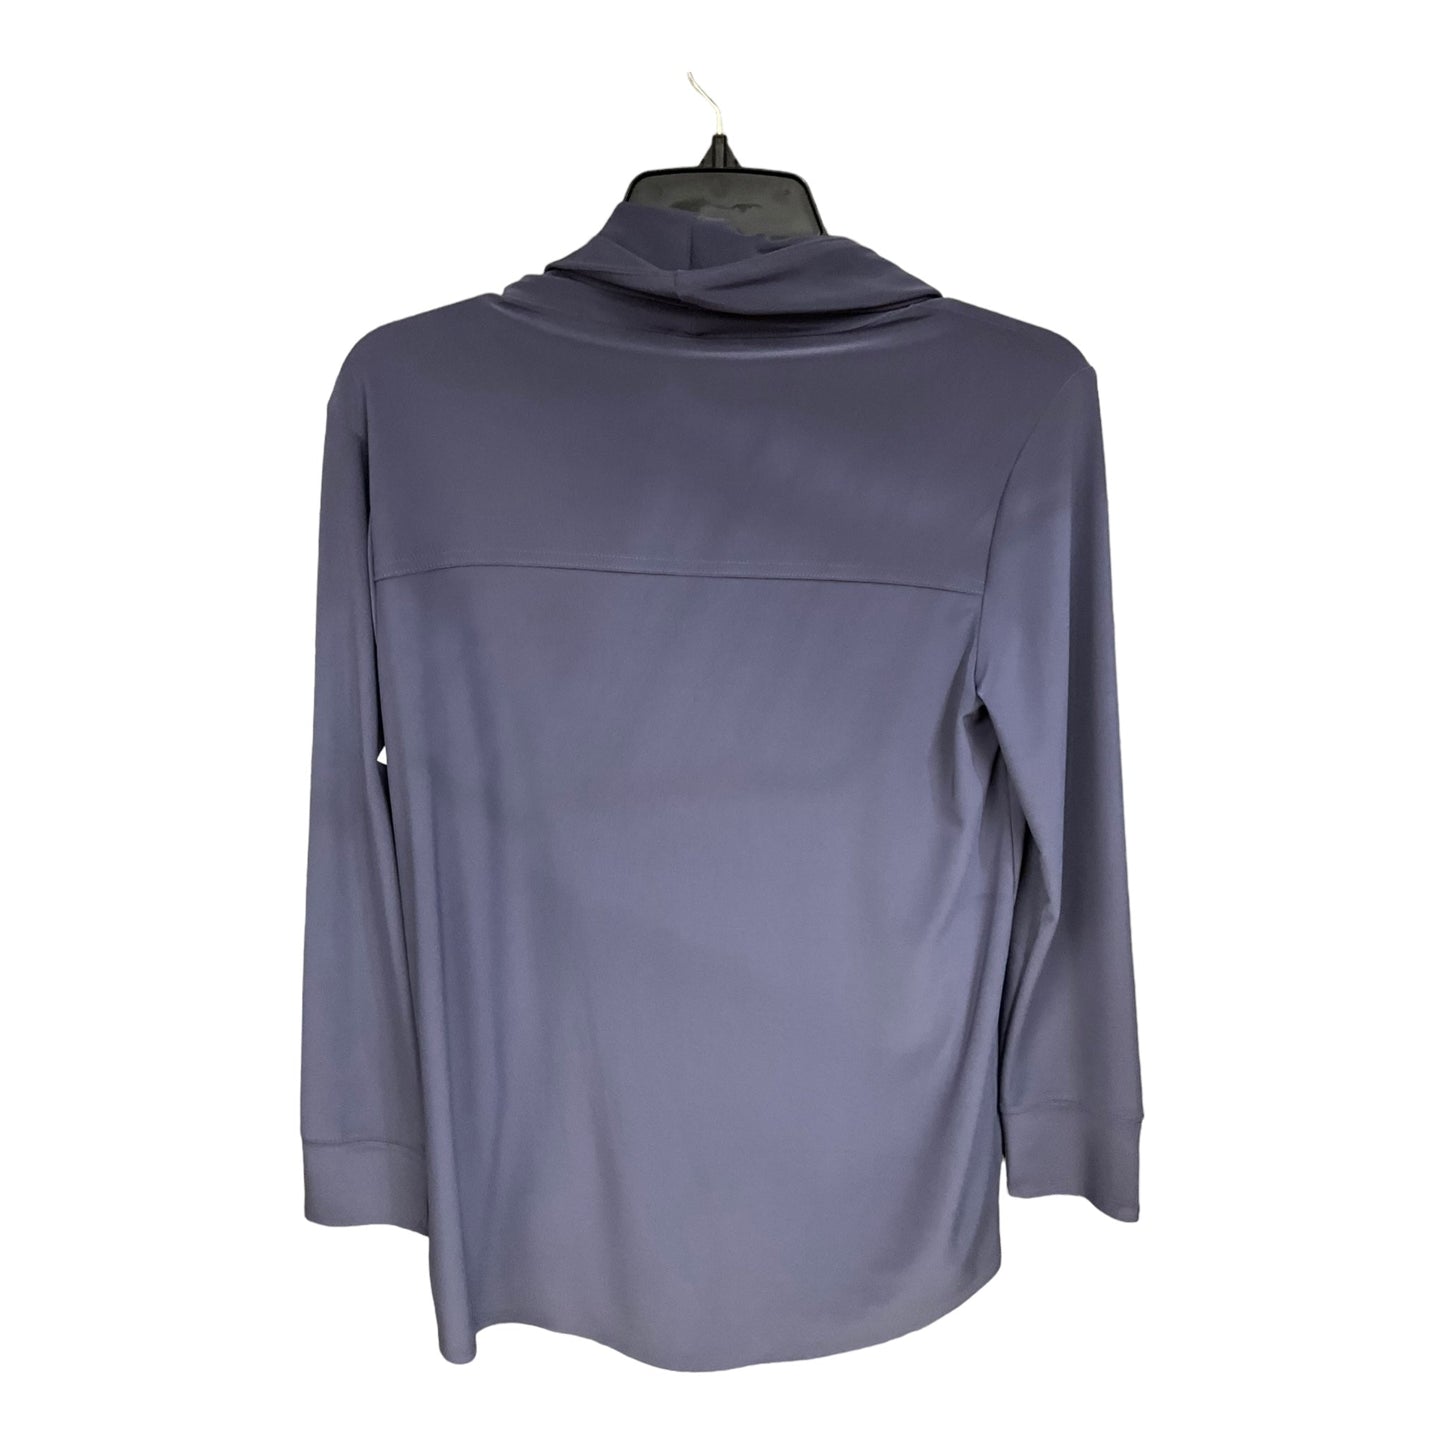 Lilac Athletic Top Long Sleeve Collar Clothes Mentor, Size S